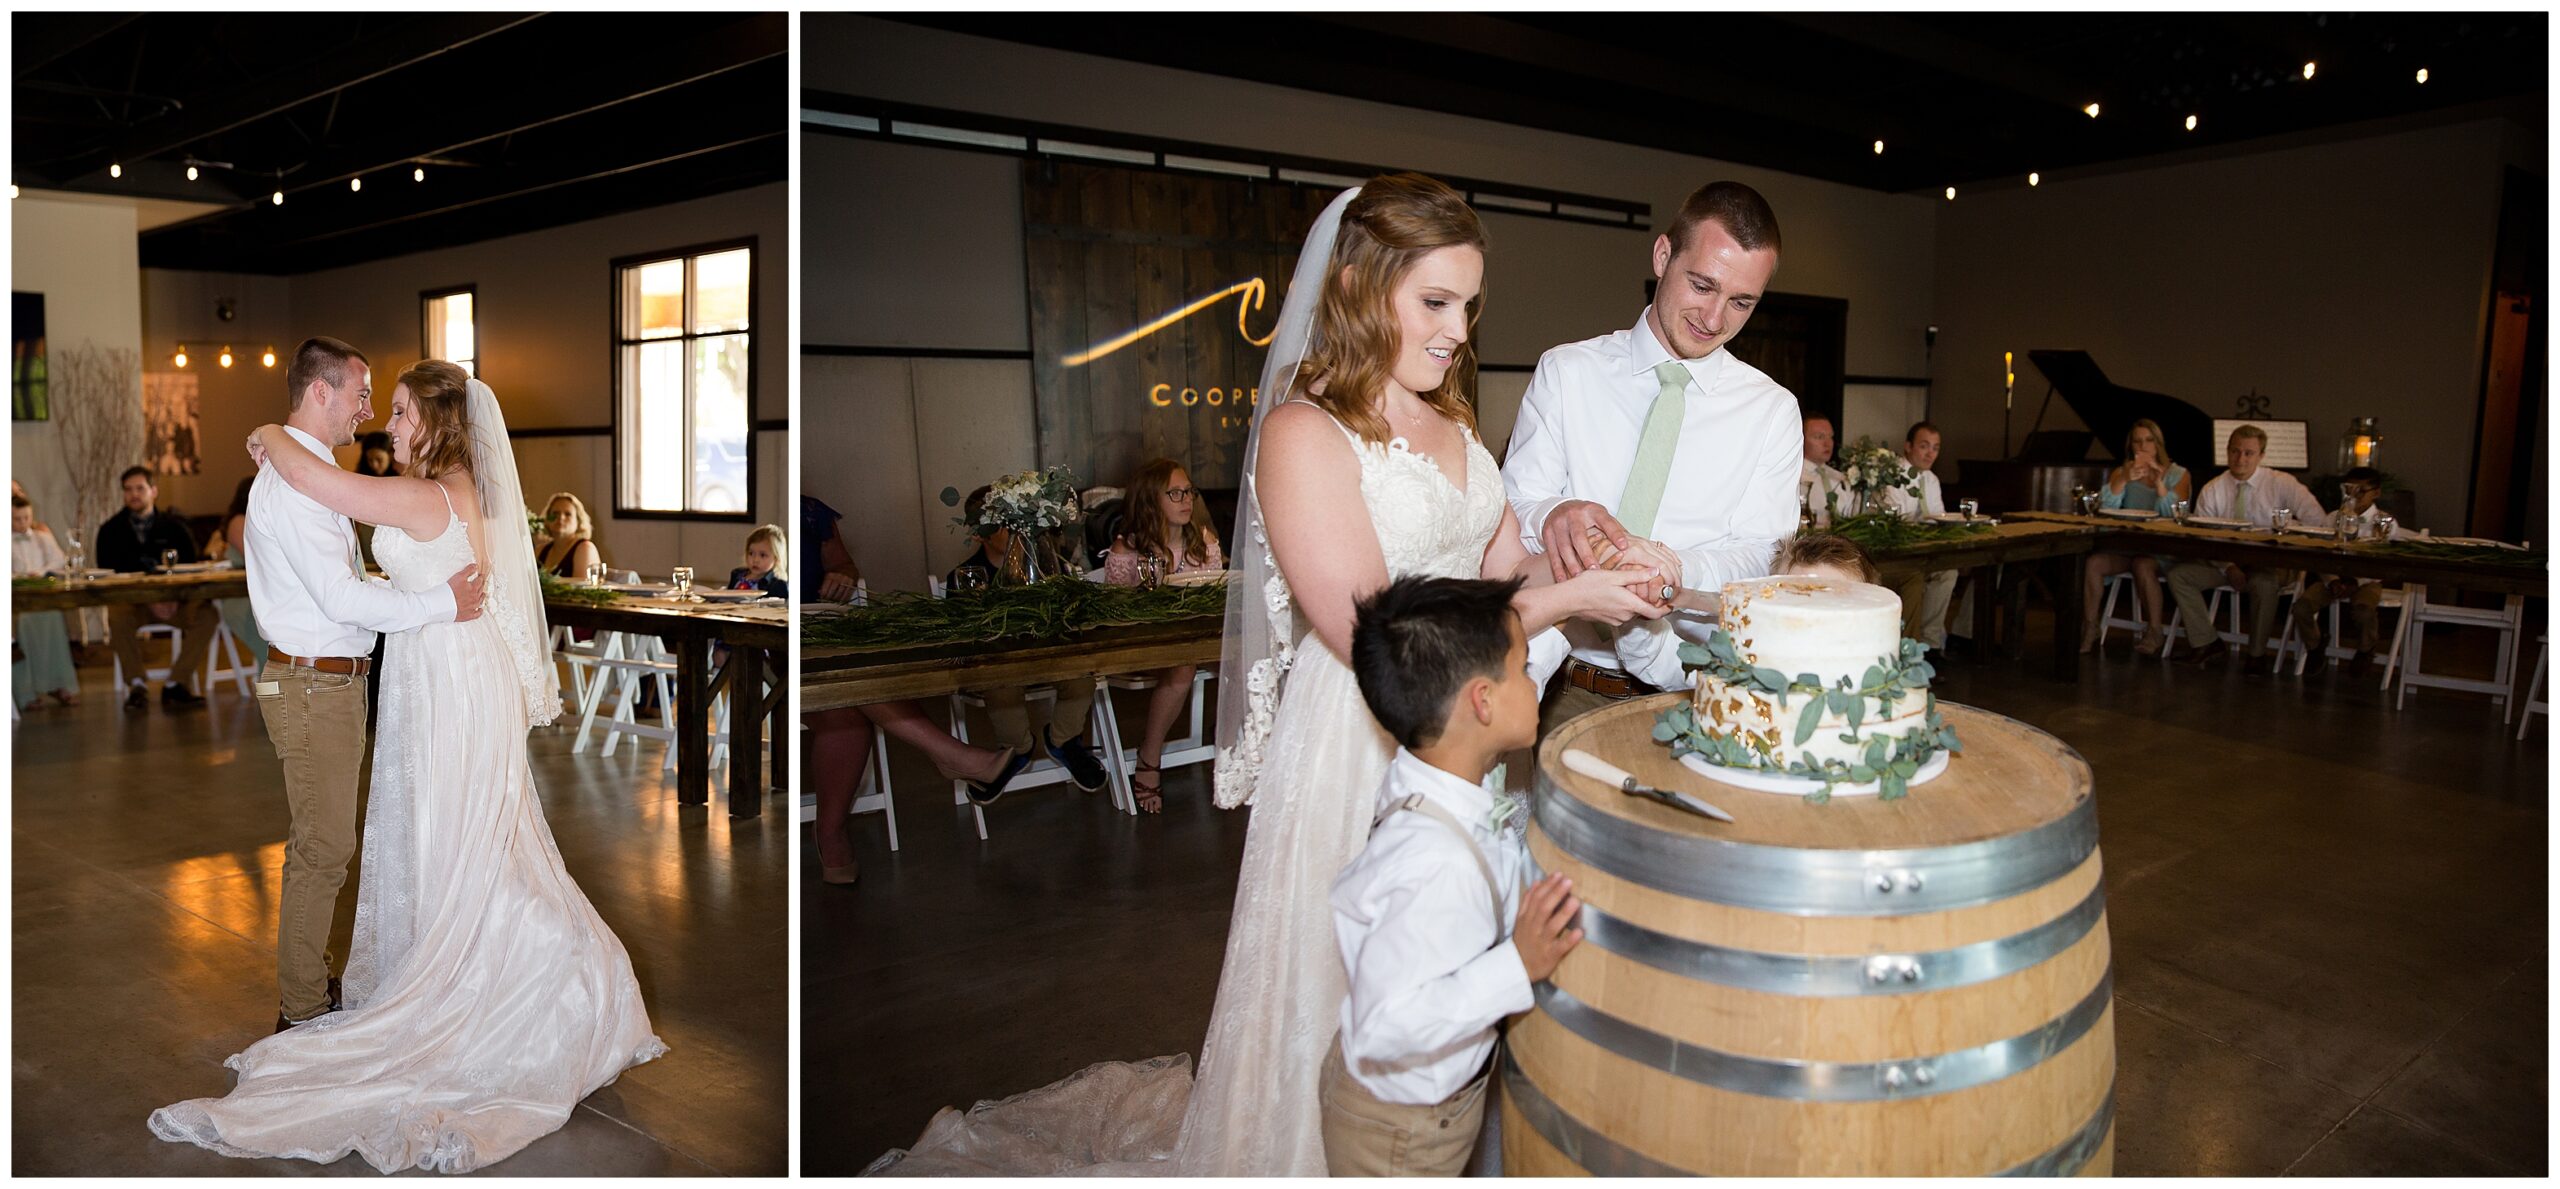 Micro wedding reception at Cooper's Ridge in Boonville Mo by Bella Faith photography 